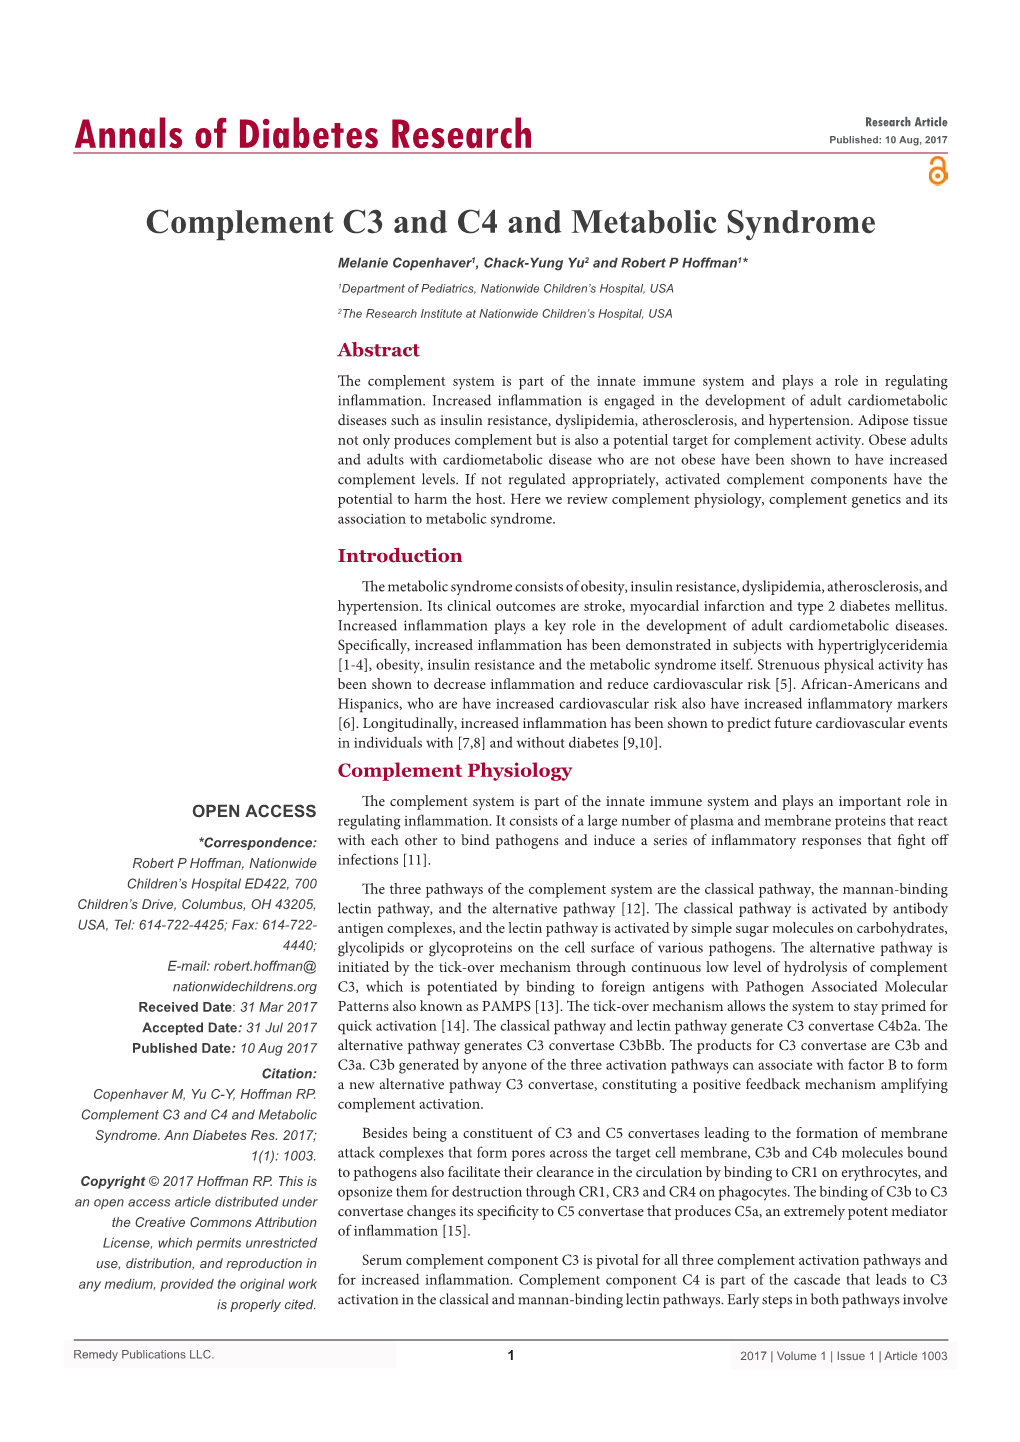 Complement C3 and C4 and Metabolic Syndrome